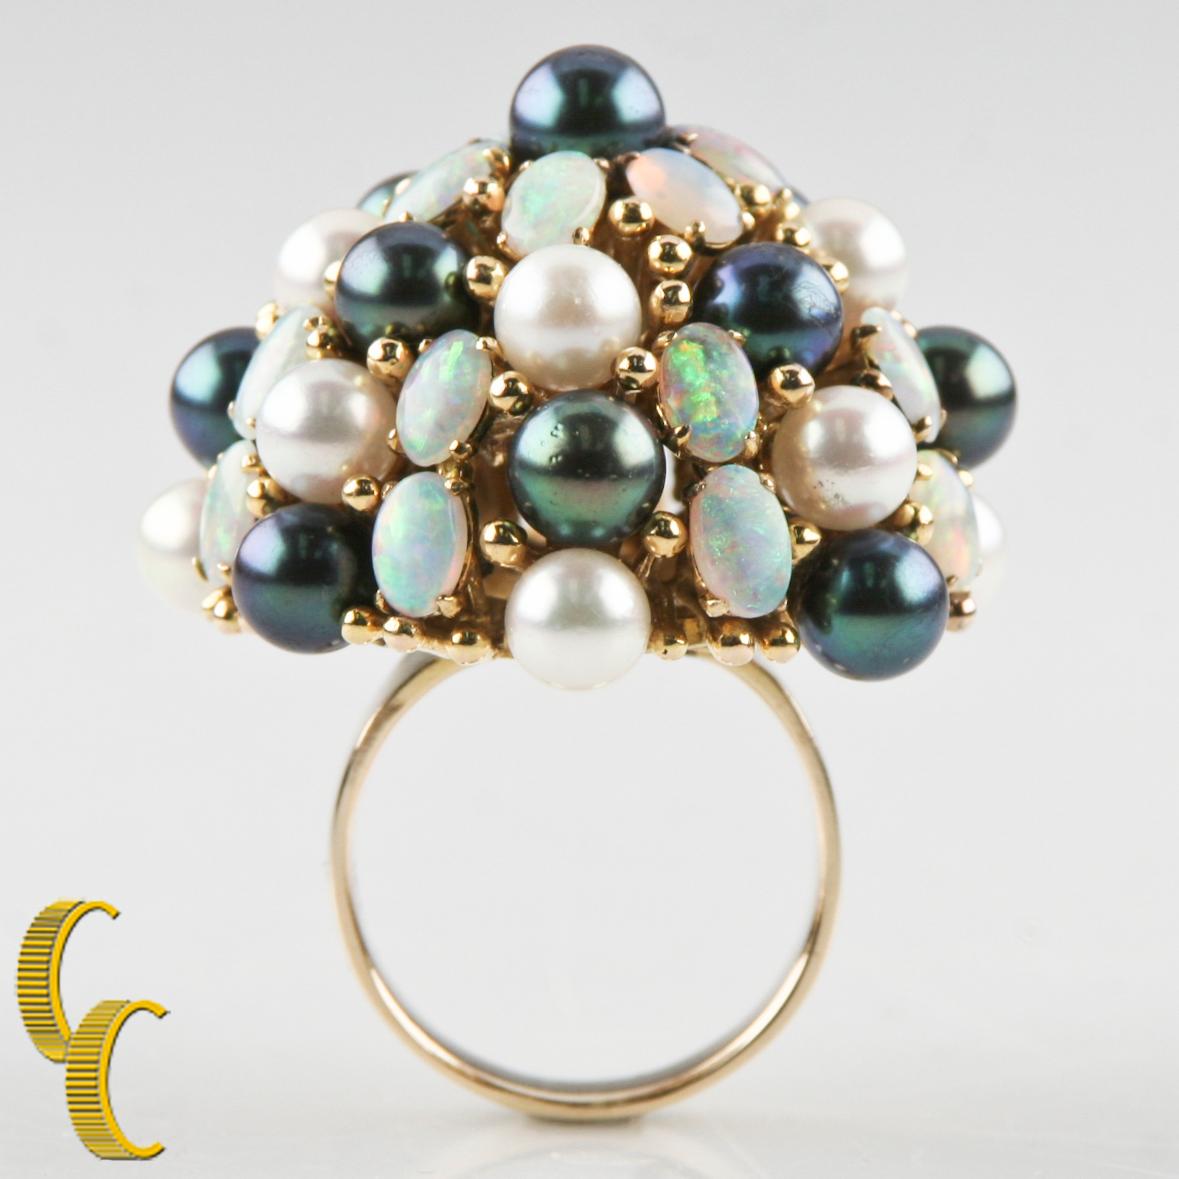 18KT yellow gold ring with a bright polish finish
Condition is good.
Ladies 18KT Yellow Gold Cultured Freshwater Pearl and Opal Ring
Size 8 1/2
The ring features a tapering bouquet of cultured freshwater pearls and opals supported by an elaborate